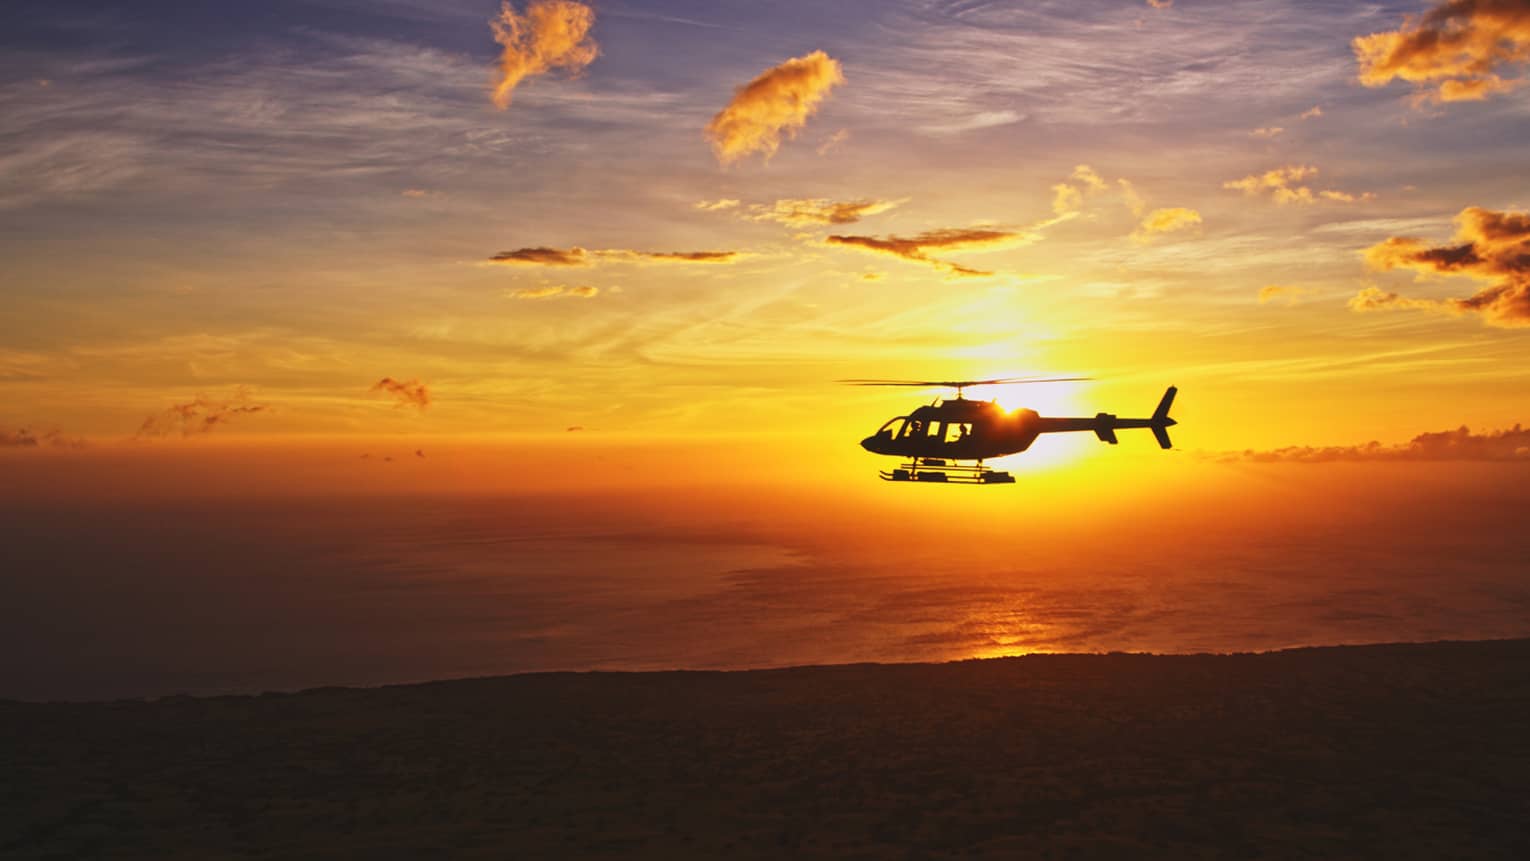 Silhouette of helicopter against orange sunset